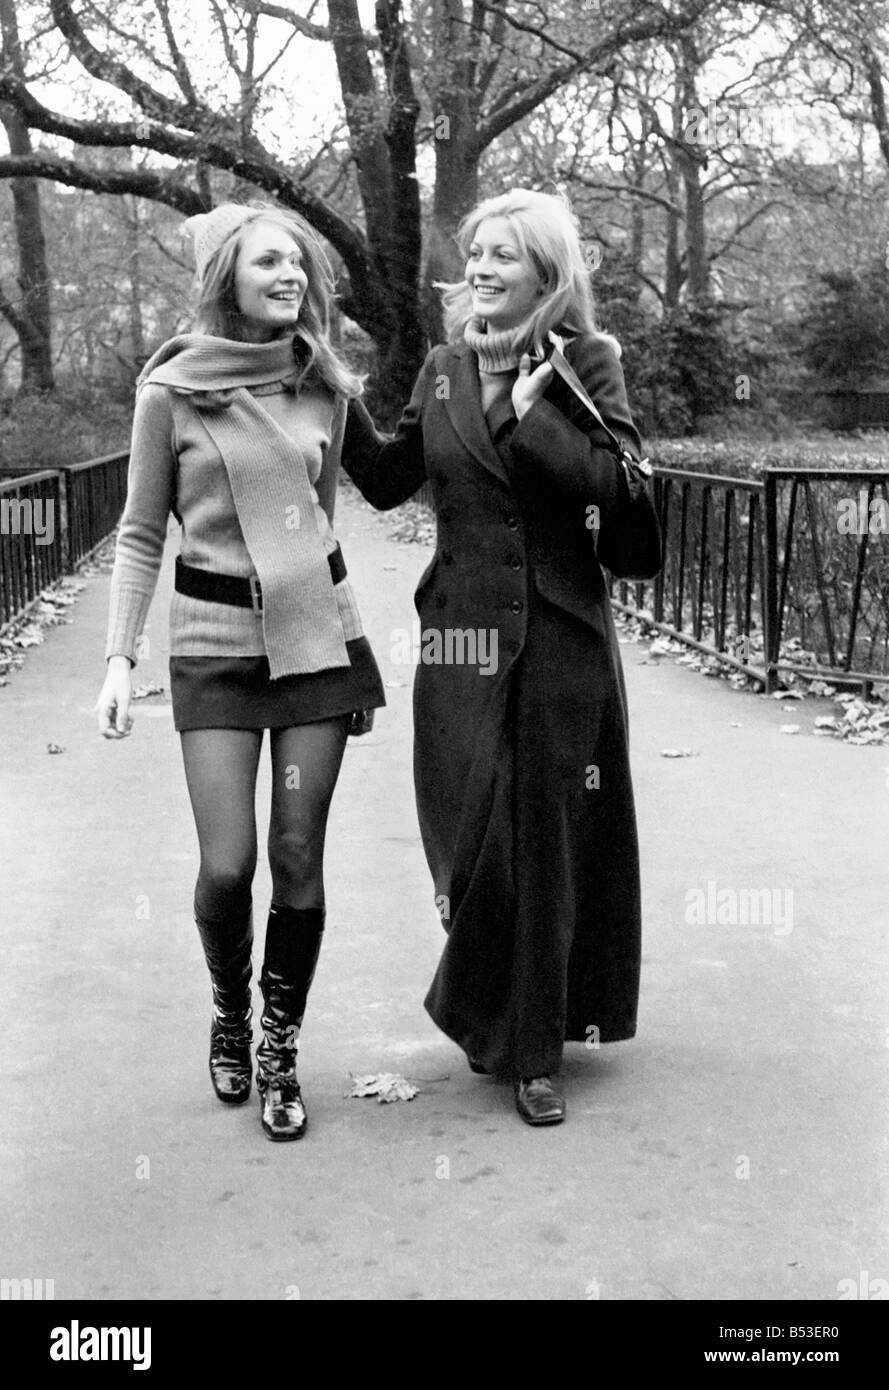 Model Blanche Webb wearing mini skirt and knee high boots with model Monica Hahn wearing a maxi coat as they stroll through the Stock Photo